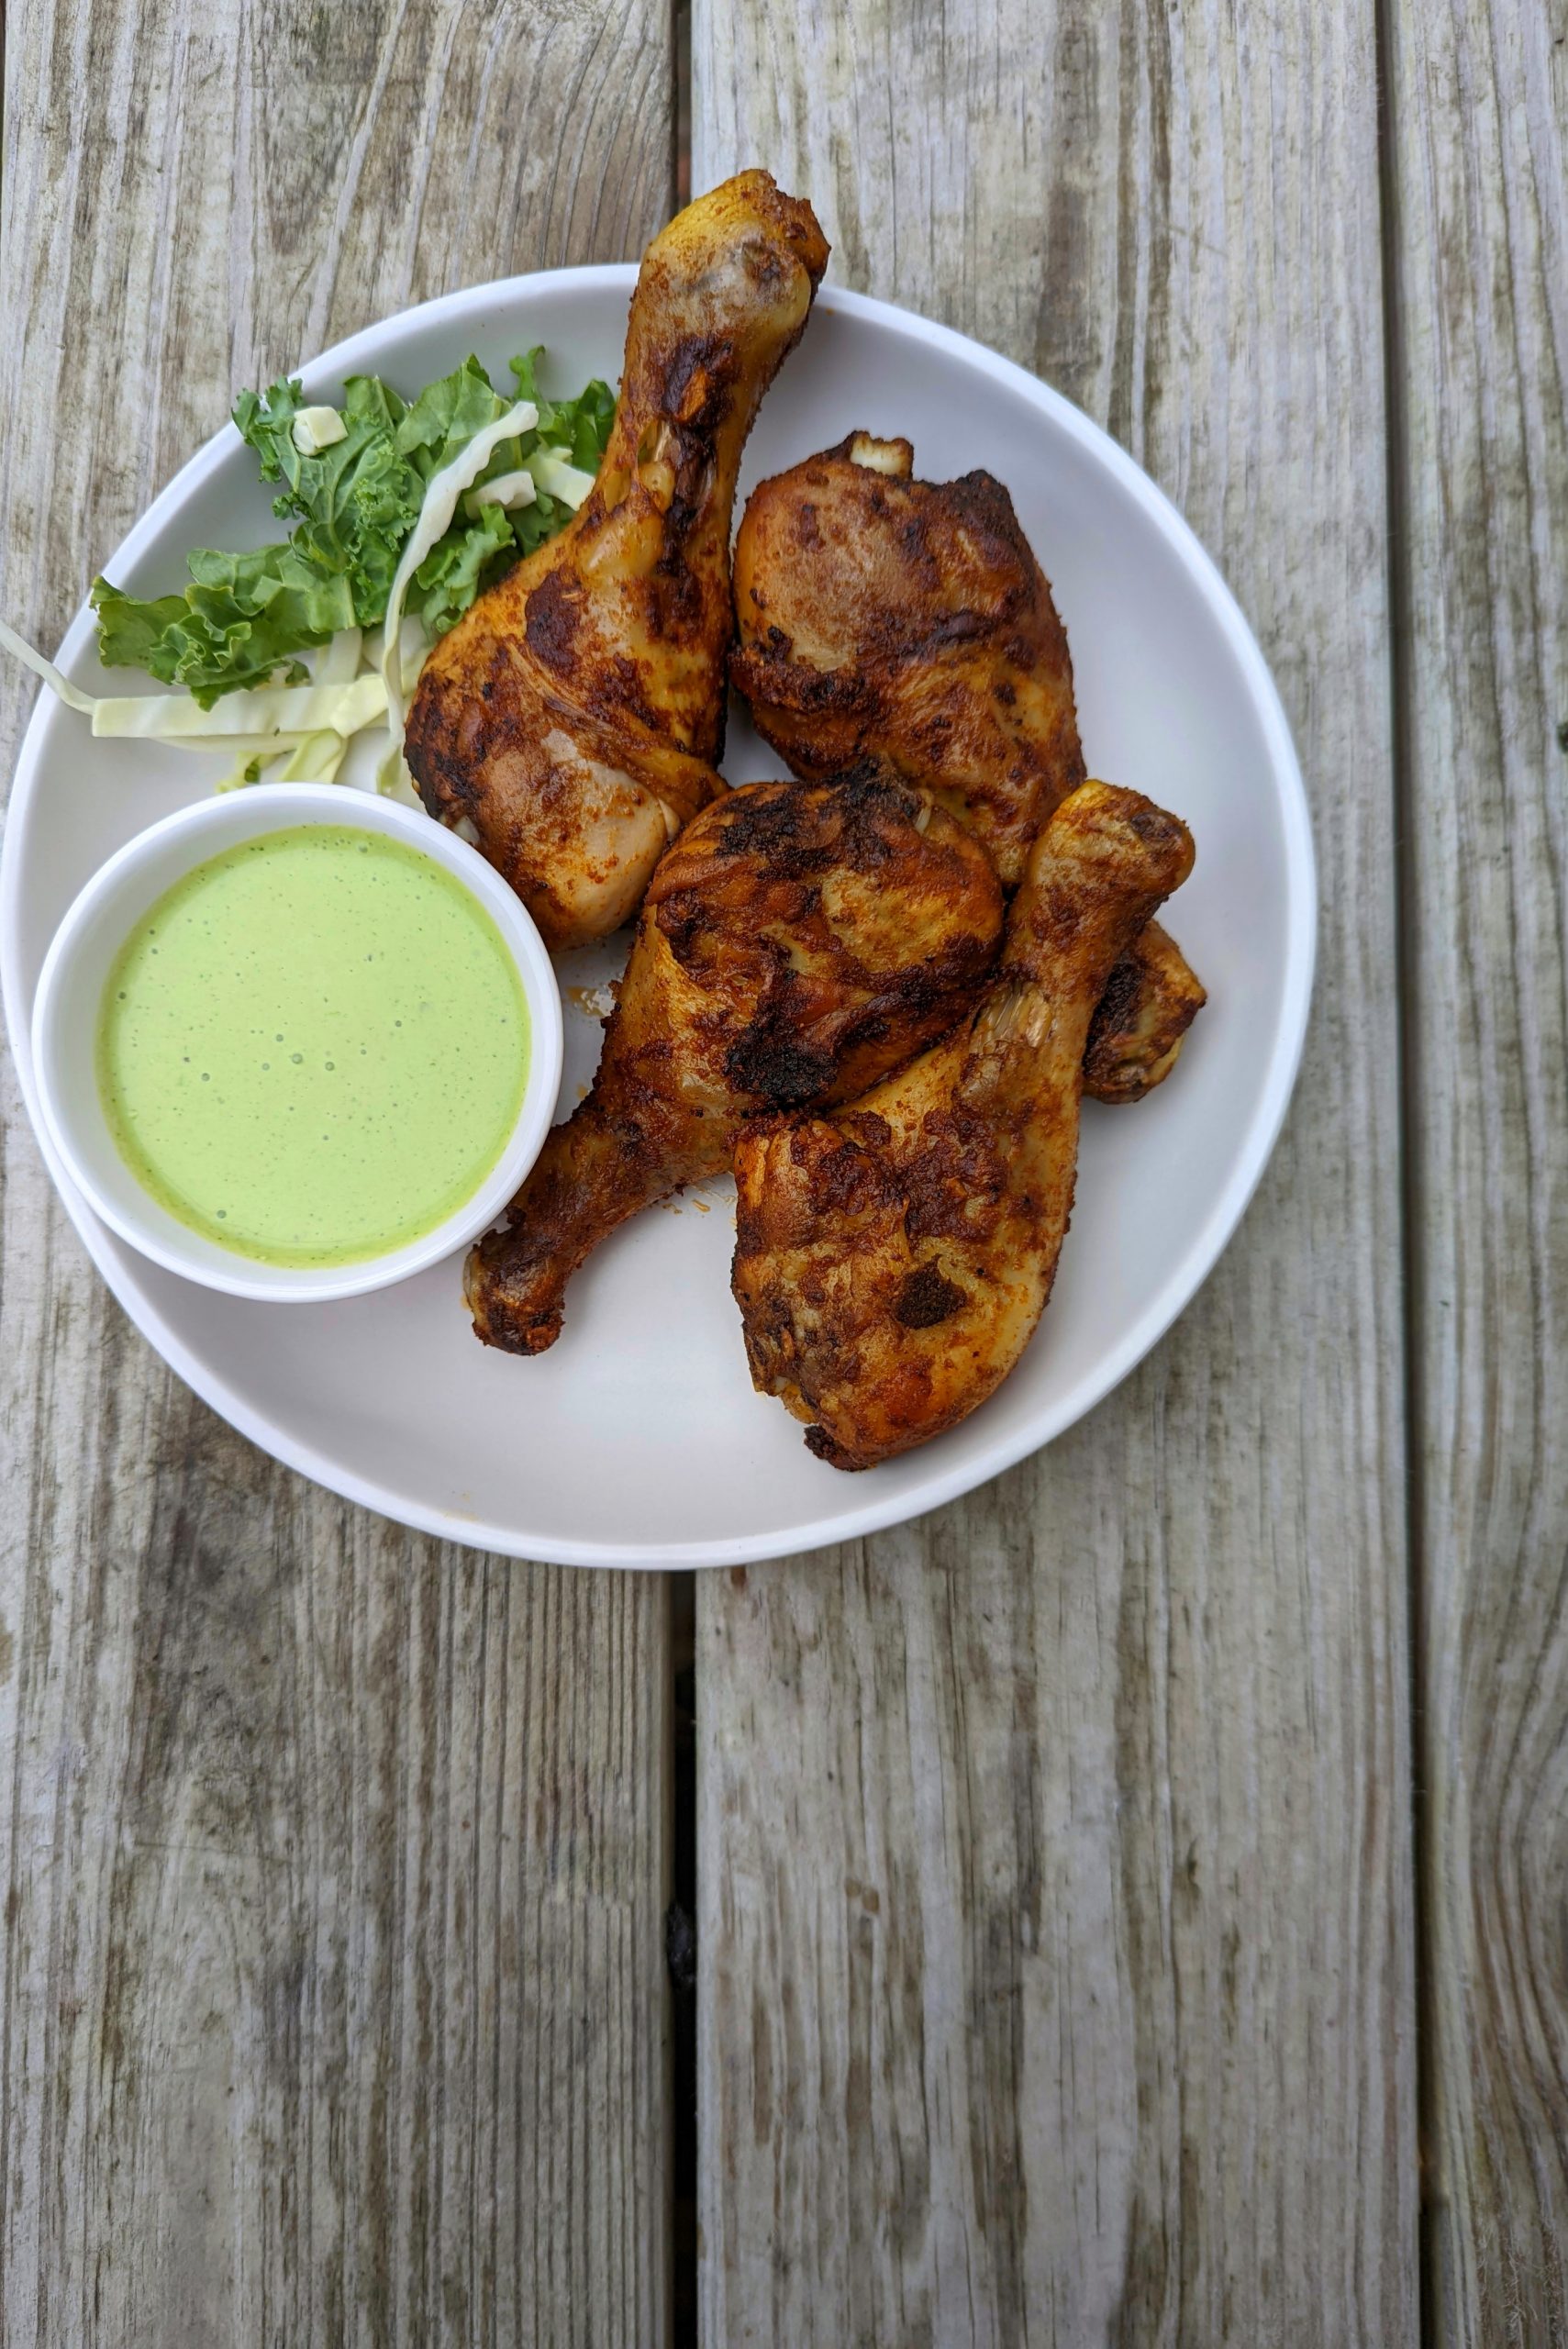 A single serving of our Peruvian roasted chicken served with serrano crema.